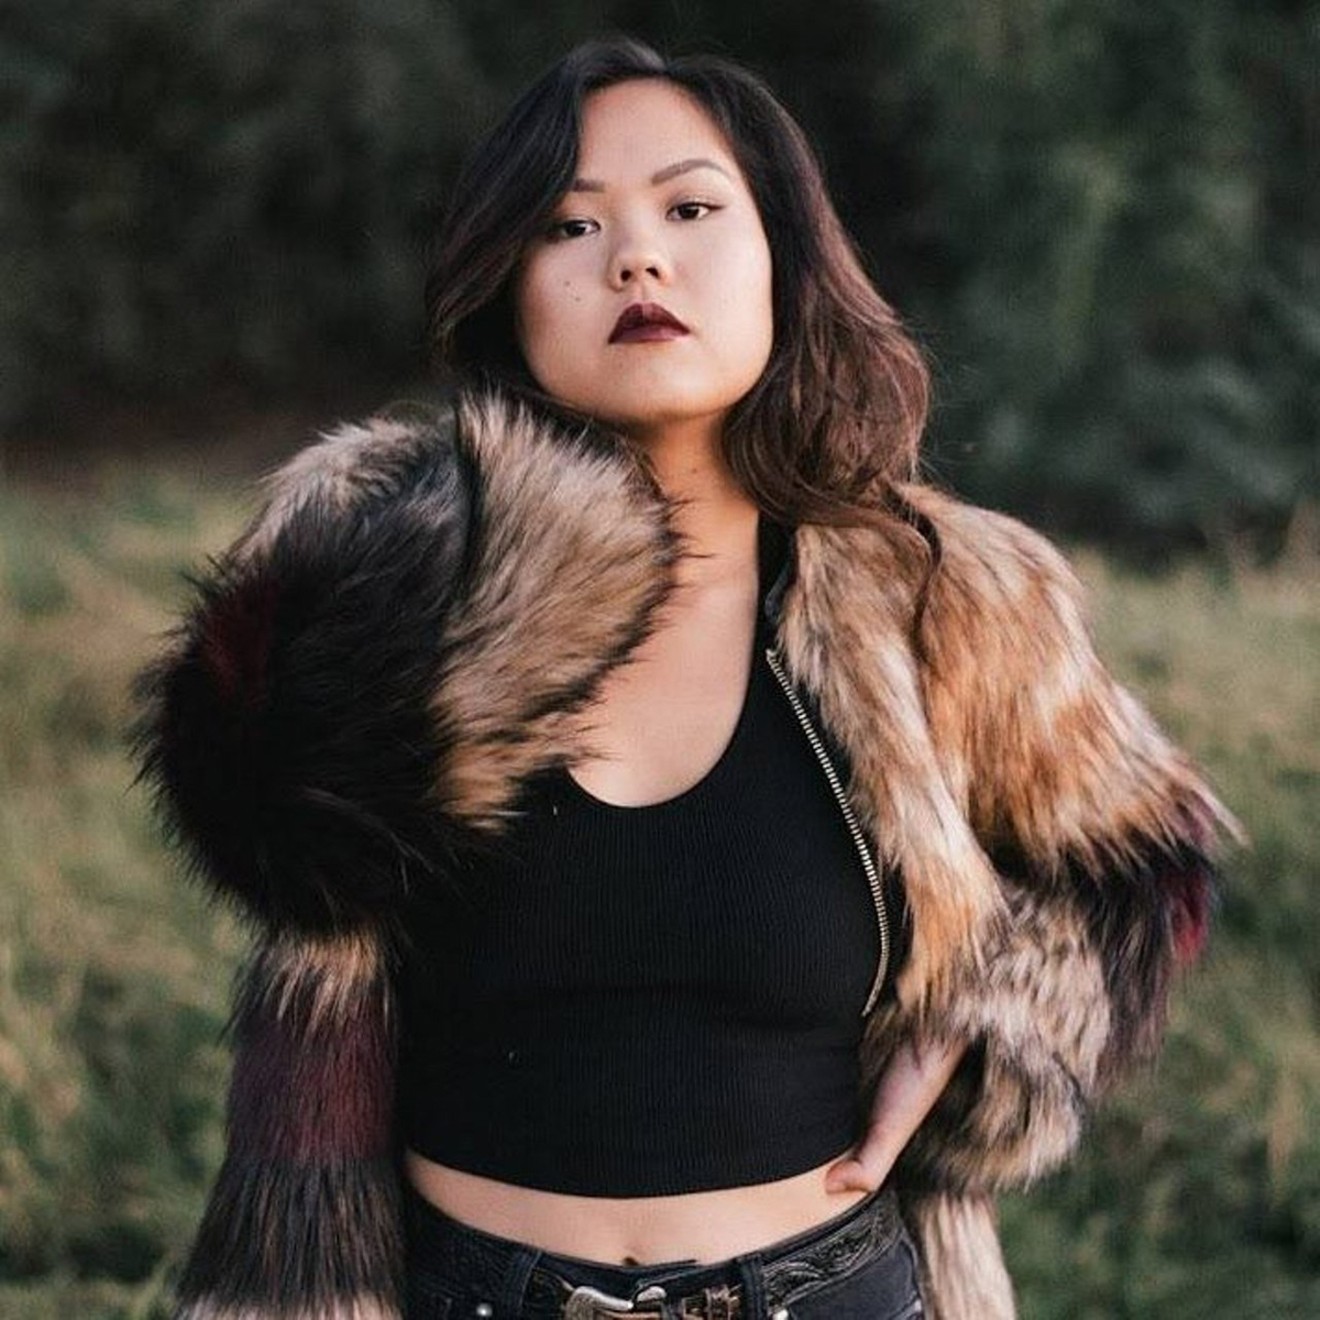 Spotify’s New Music Friday playlist gave Denver artist Chloe Tang a surprising boost.